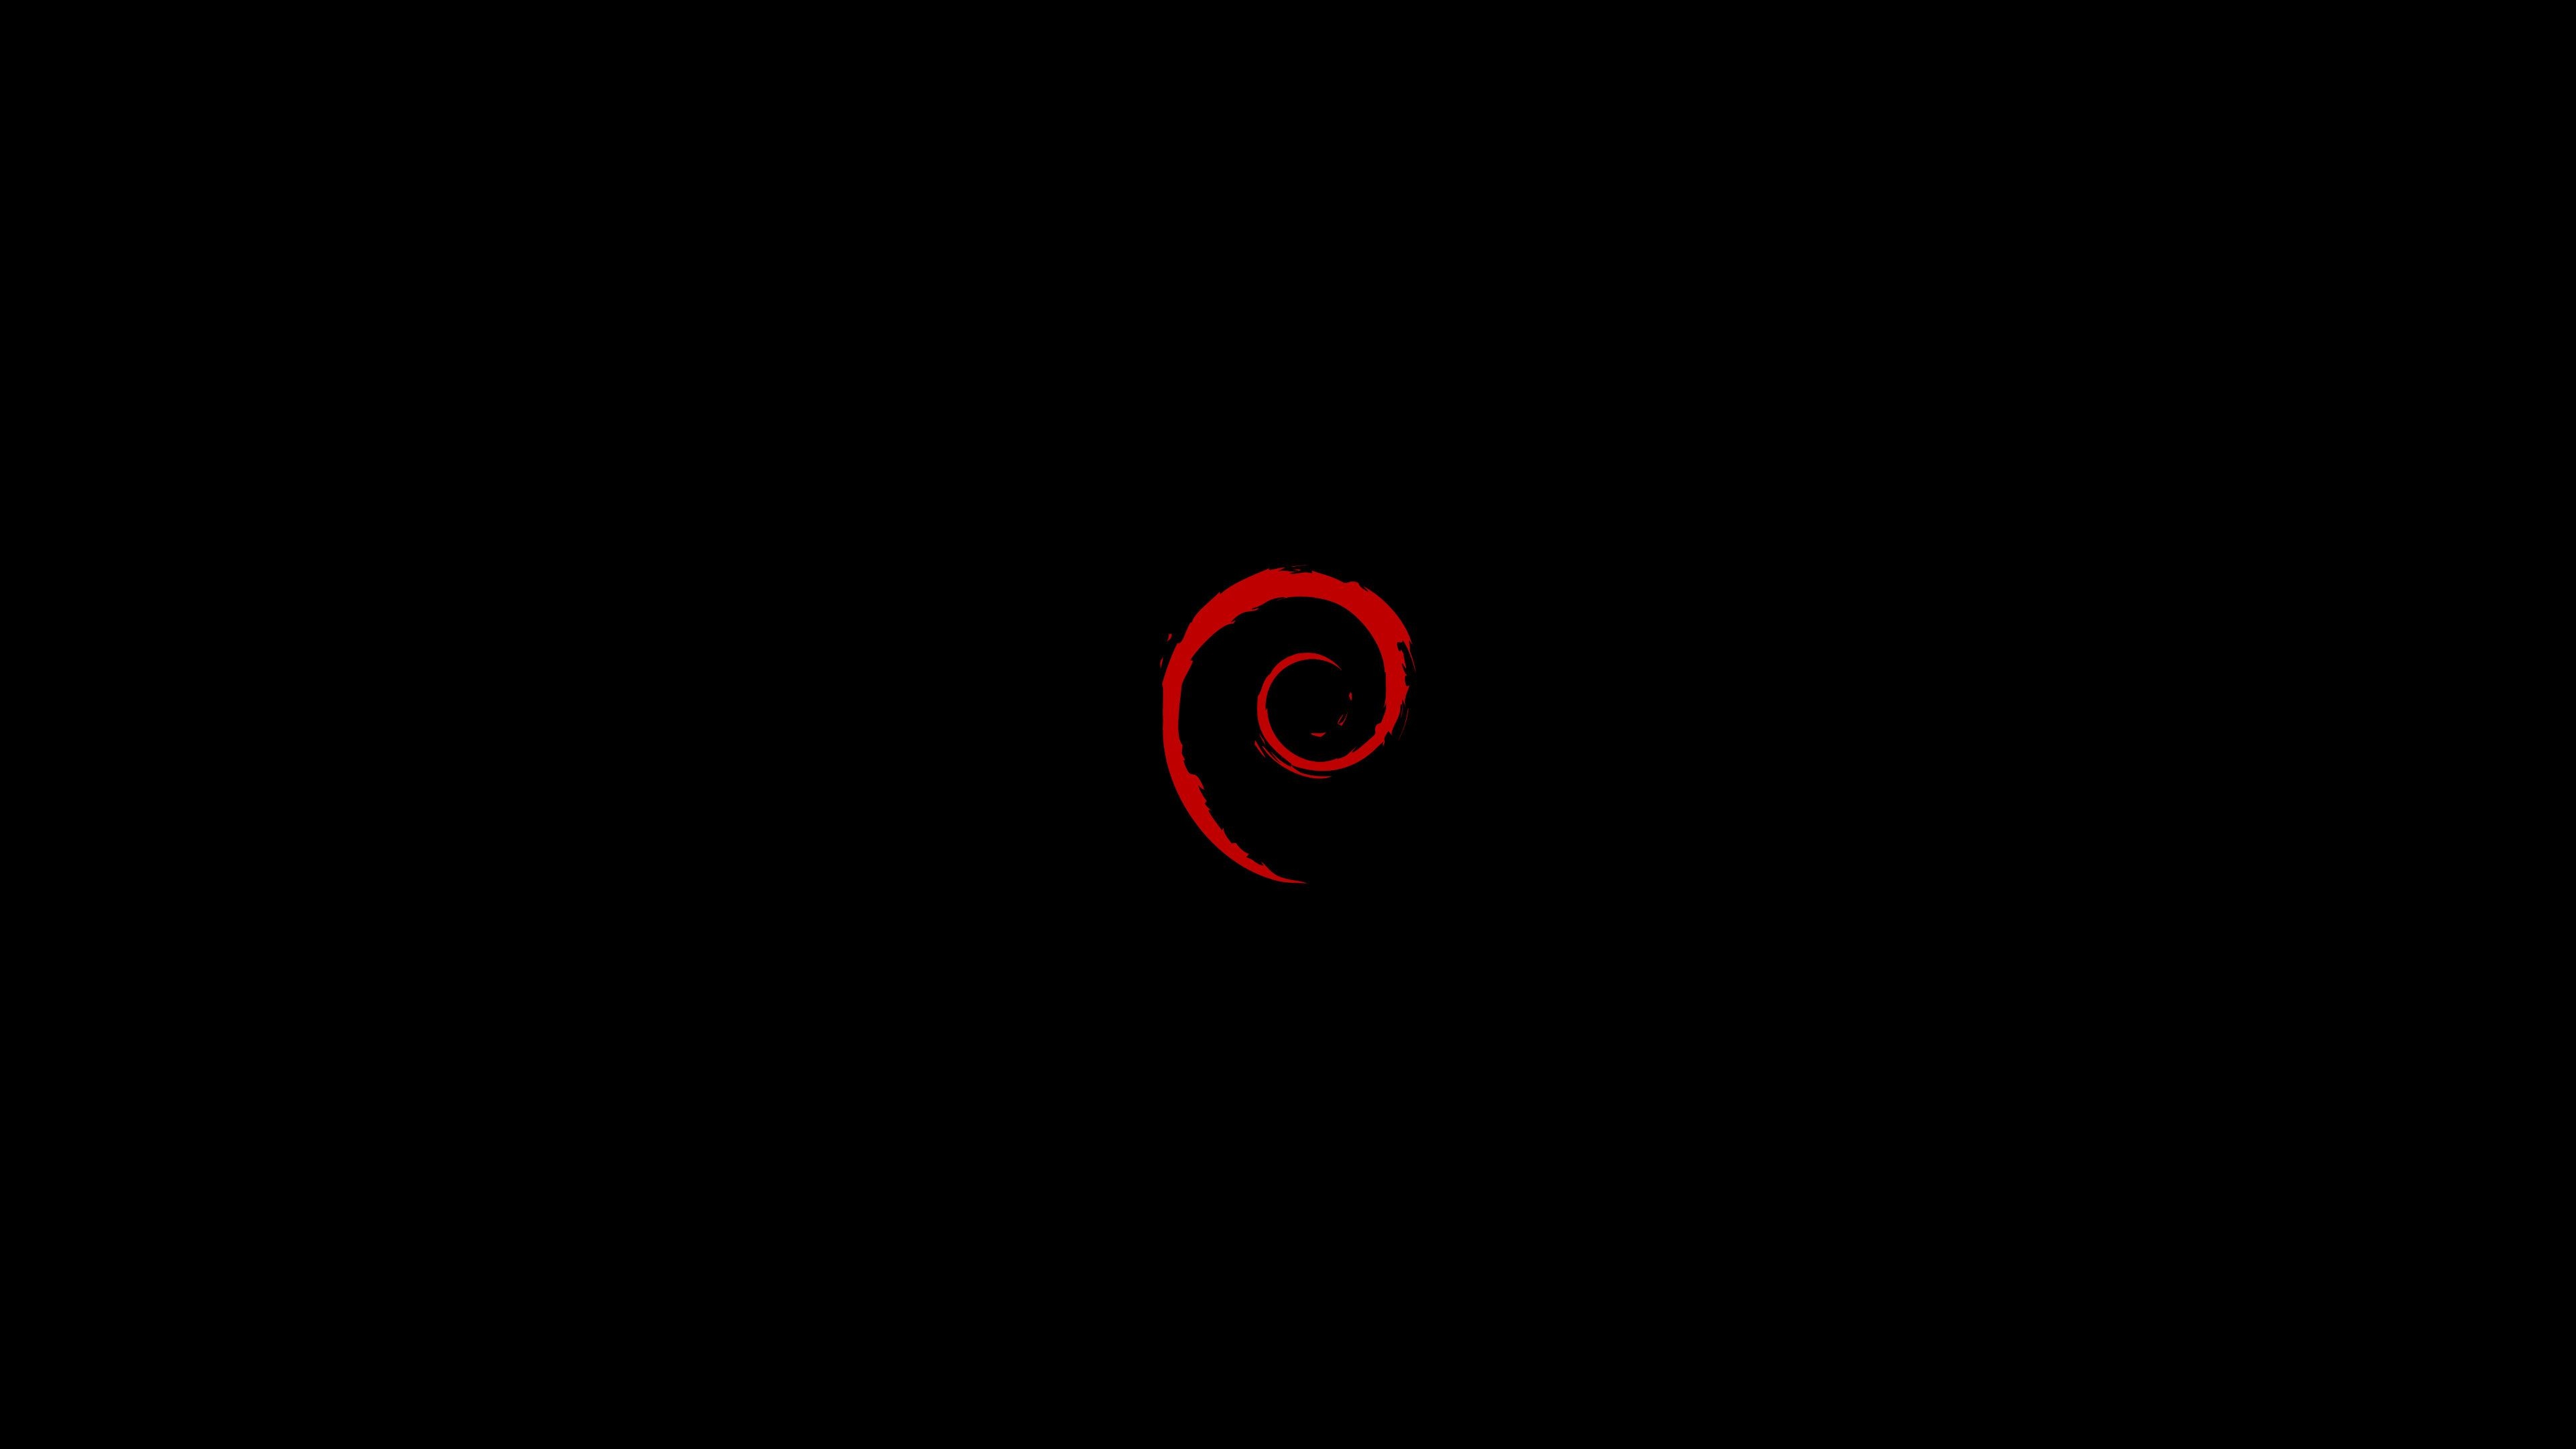 Golden Ratio: Minimalism, Red whirl, Debian, A Linux distribution, Operating system. 3840x2160 4K Background.